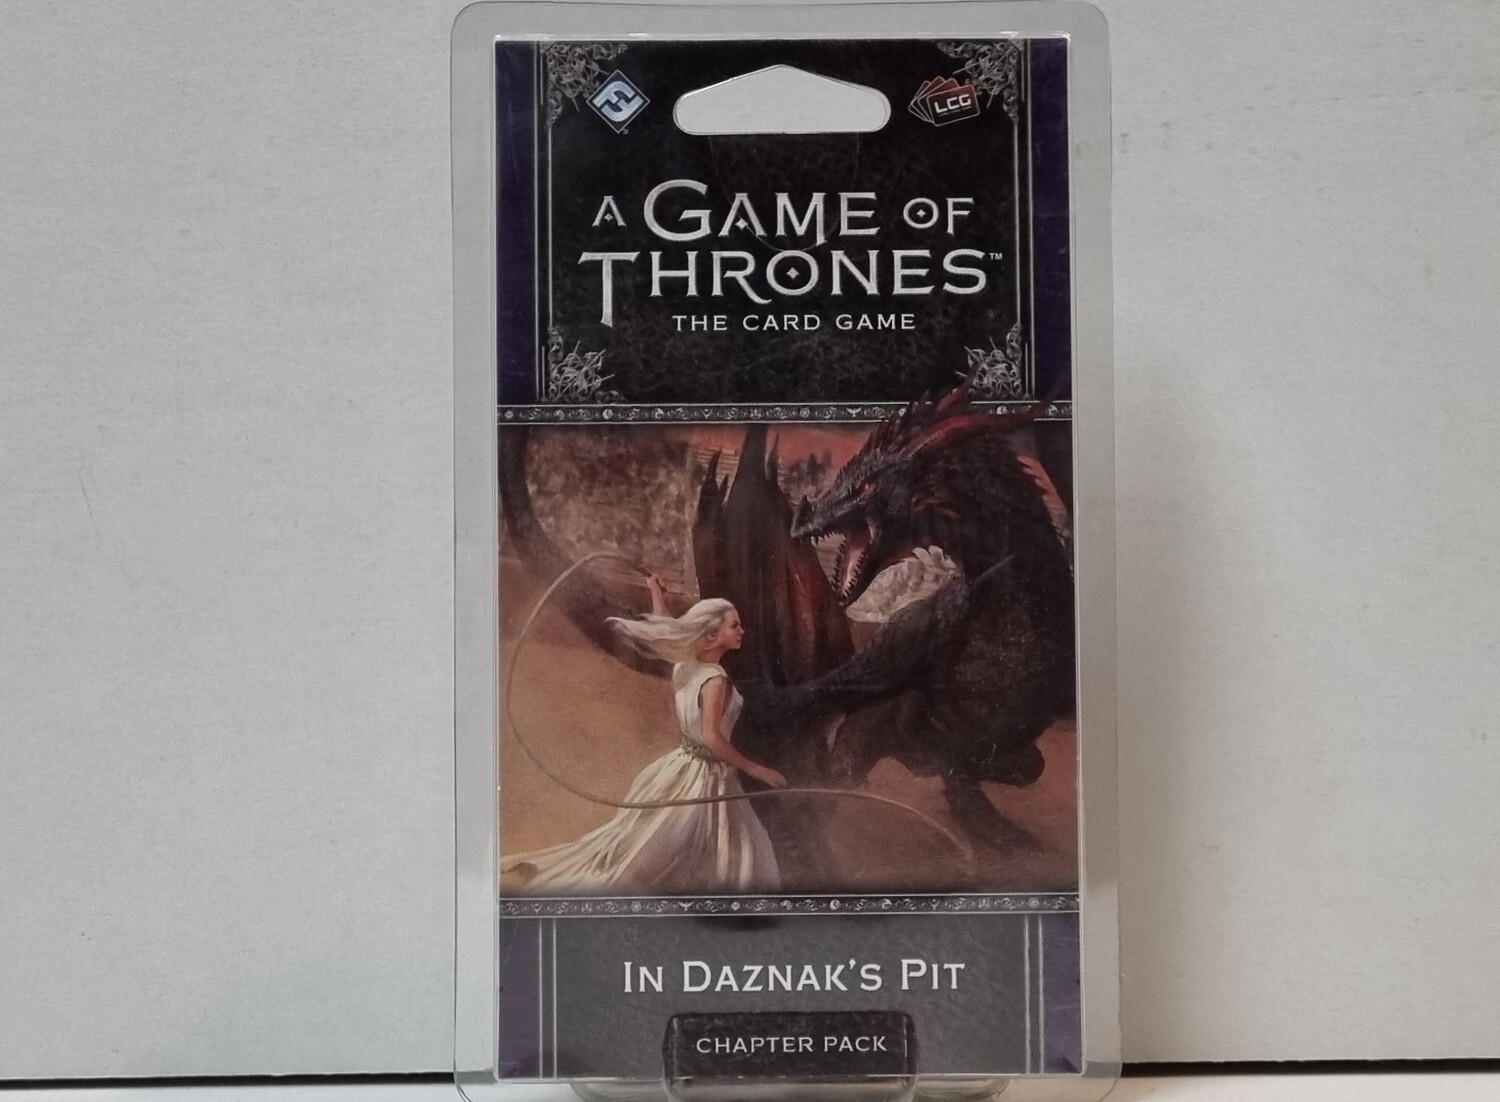 A Game of Thrones, Card Game, In Daznak's Pit, Chapter Pack